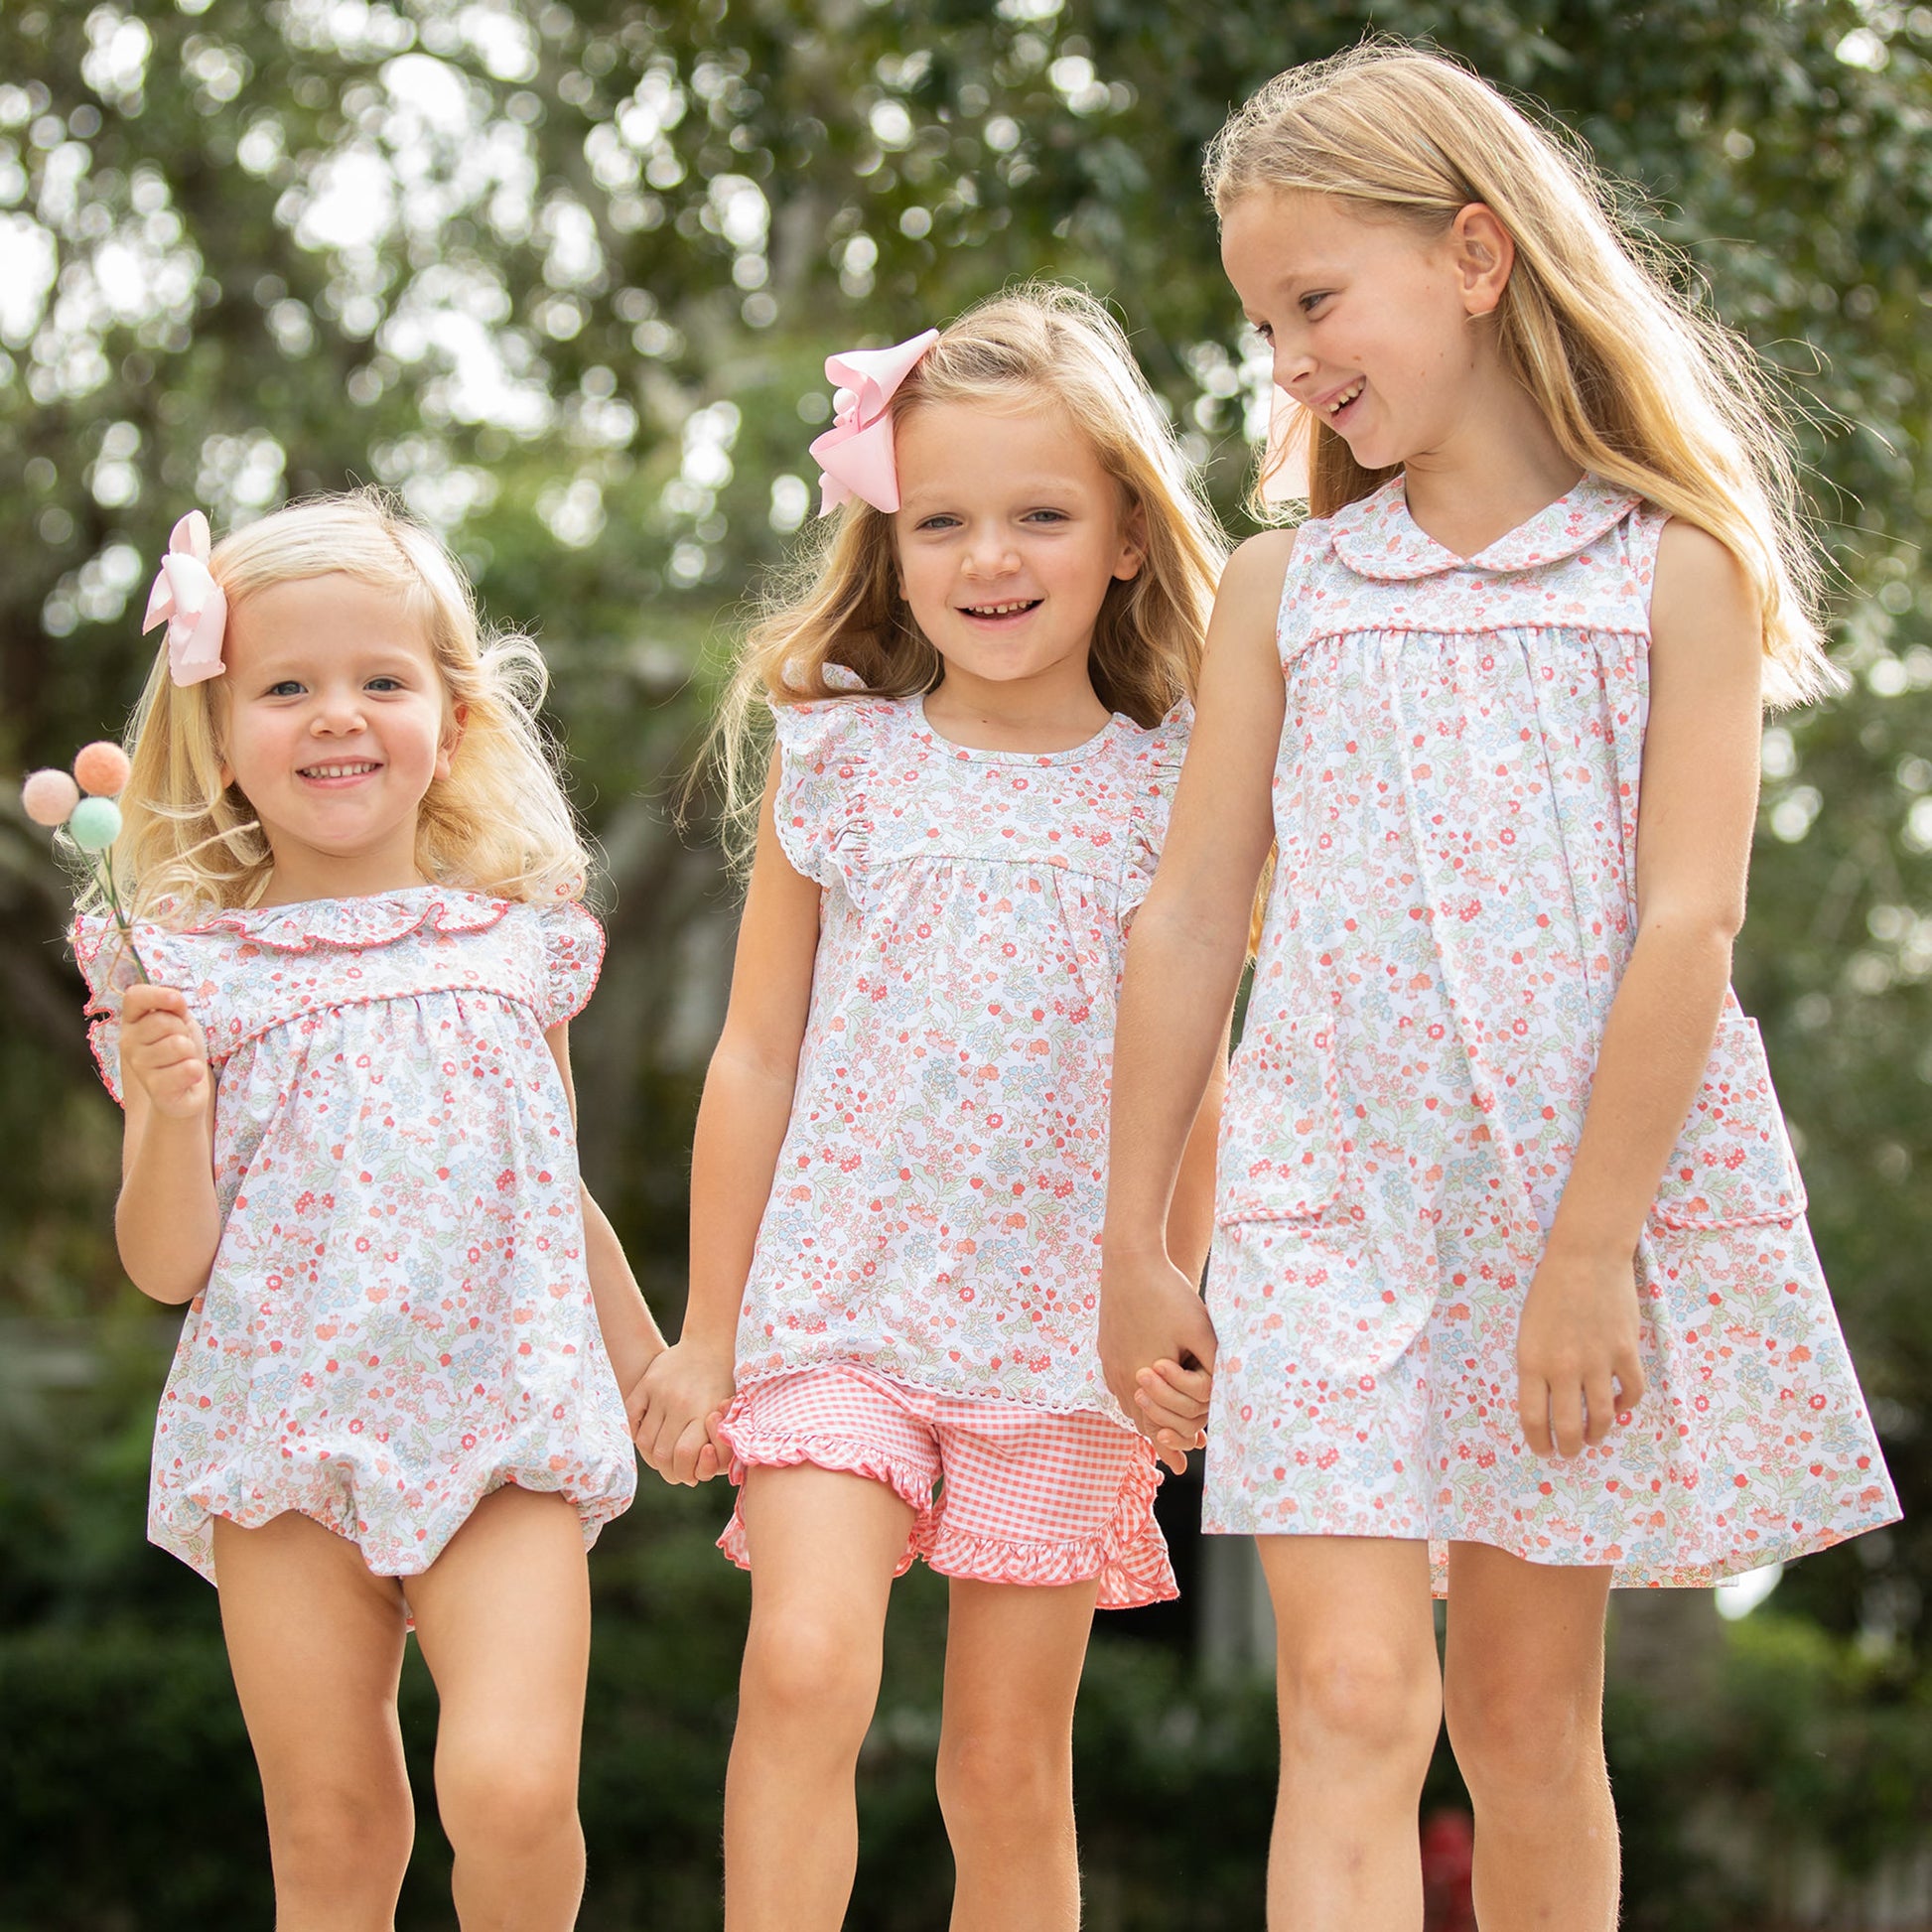 Three little girls holding hands and walking in slowered shirts and dresses